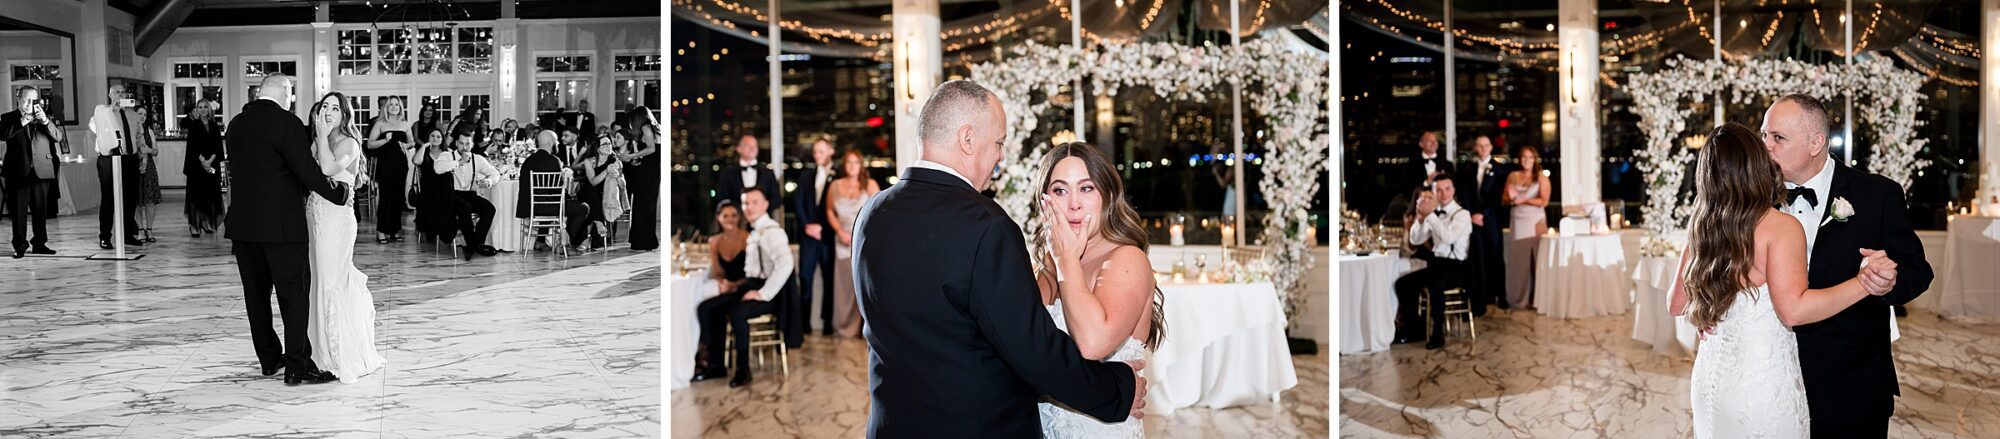 A father daughter dance at a wedding reception.